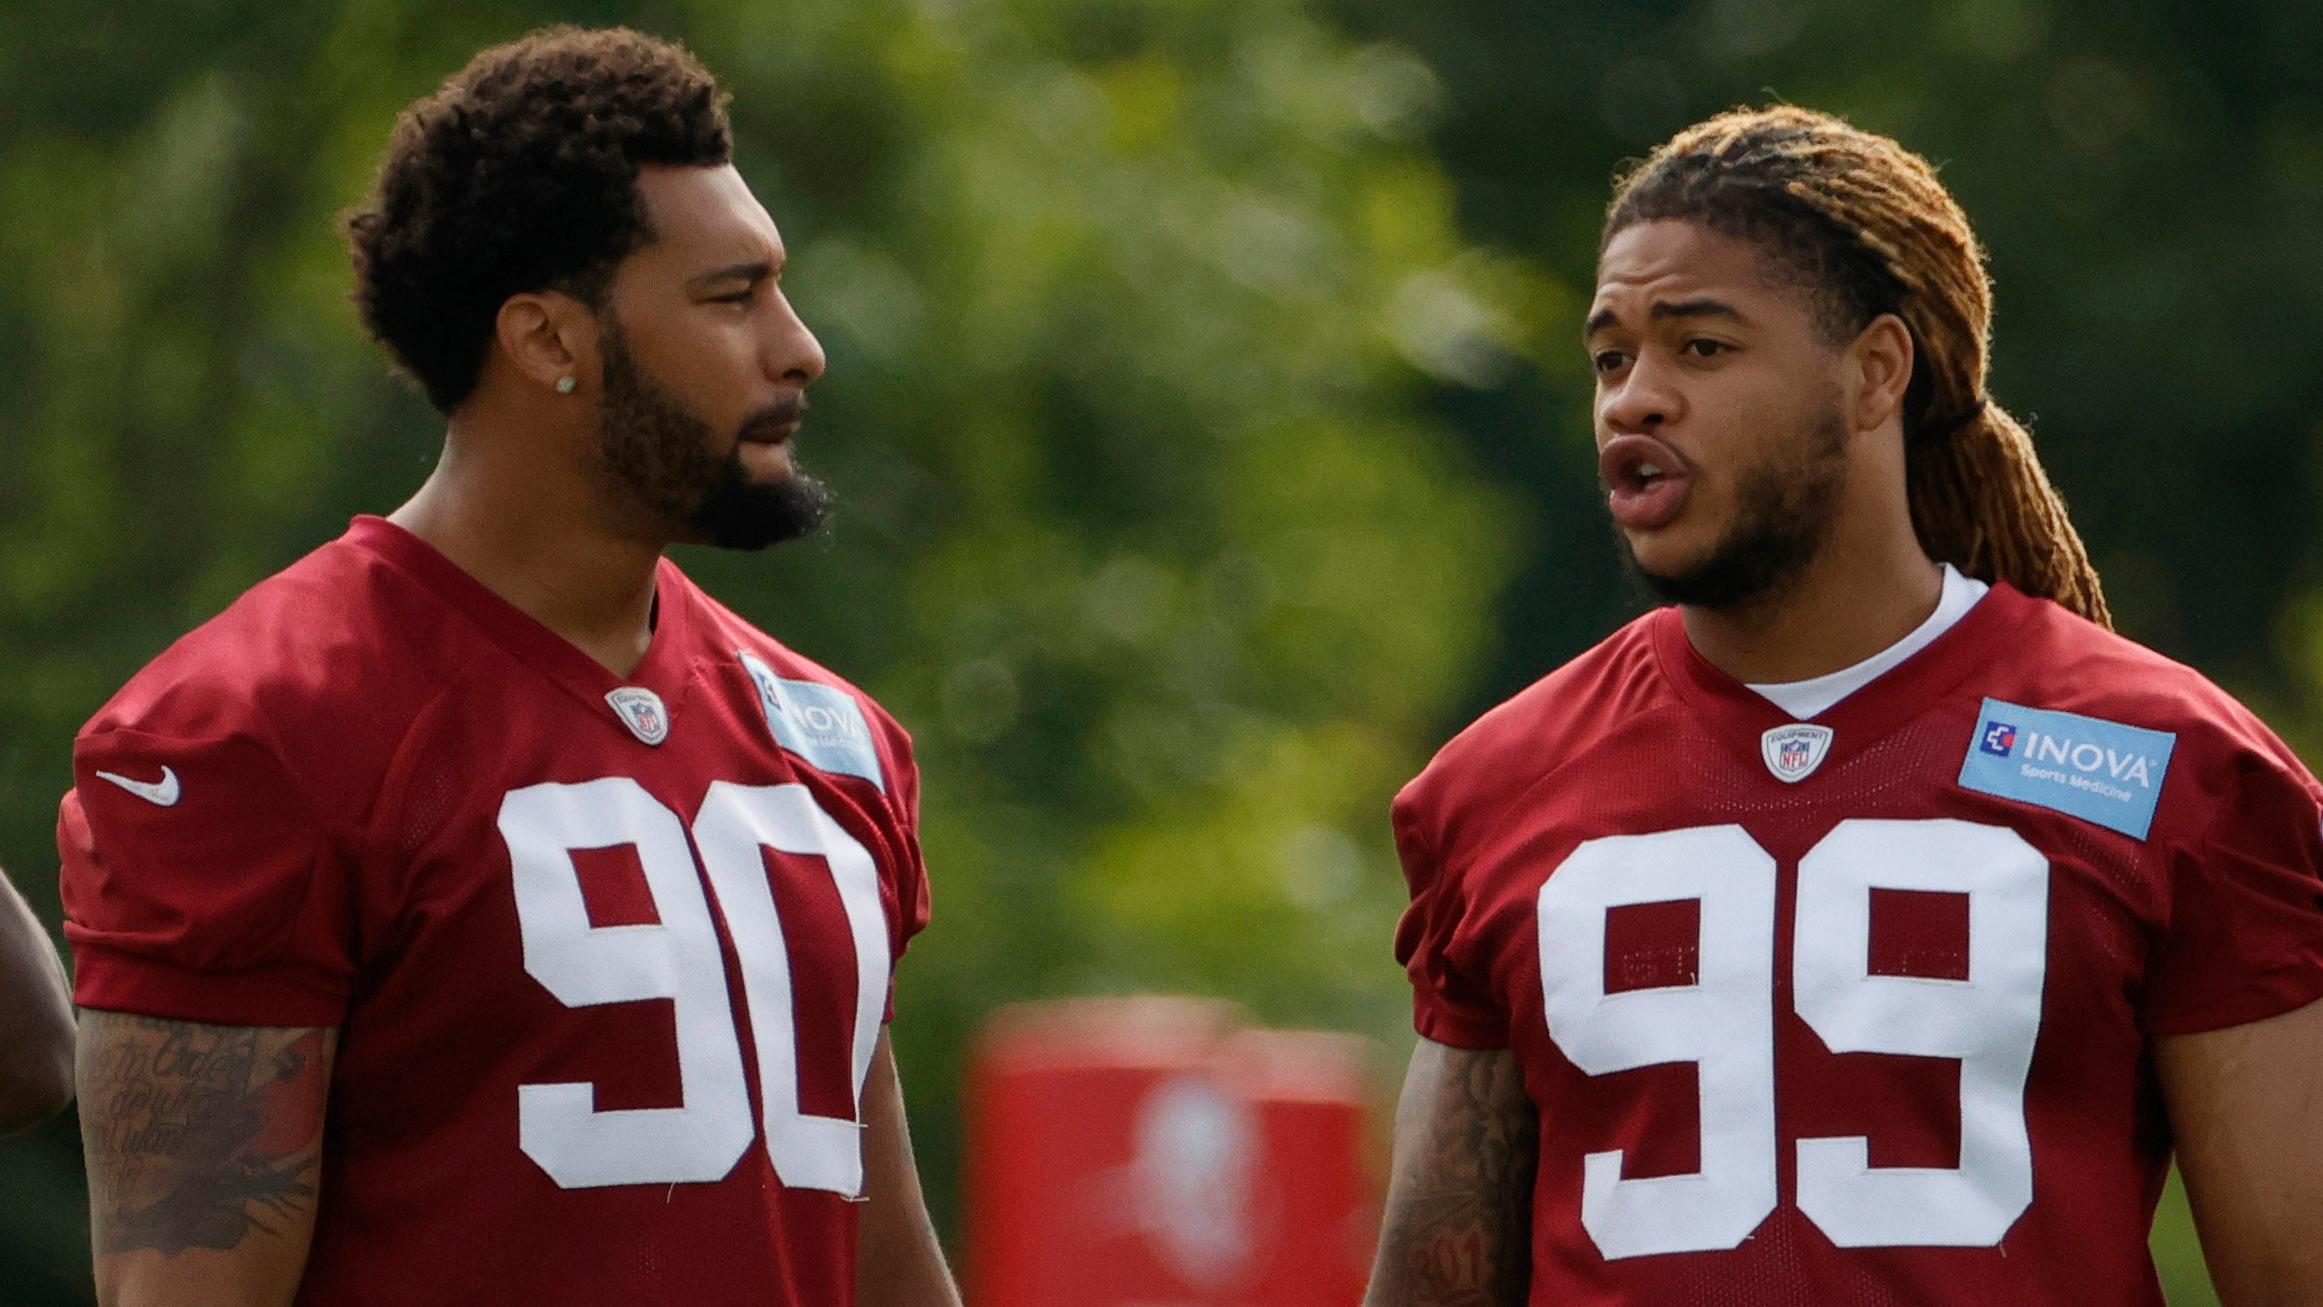 Washington Football Team defensive end Montez Sweat (90) talks with Washington Football Team defensive end Chase Young (99) prior to drills as part of minicamp at Inova Sports Performance Center. / Geoff Burke - USA TODAY Sports